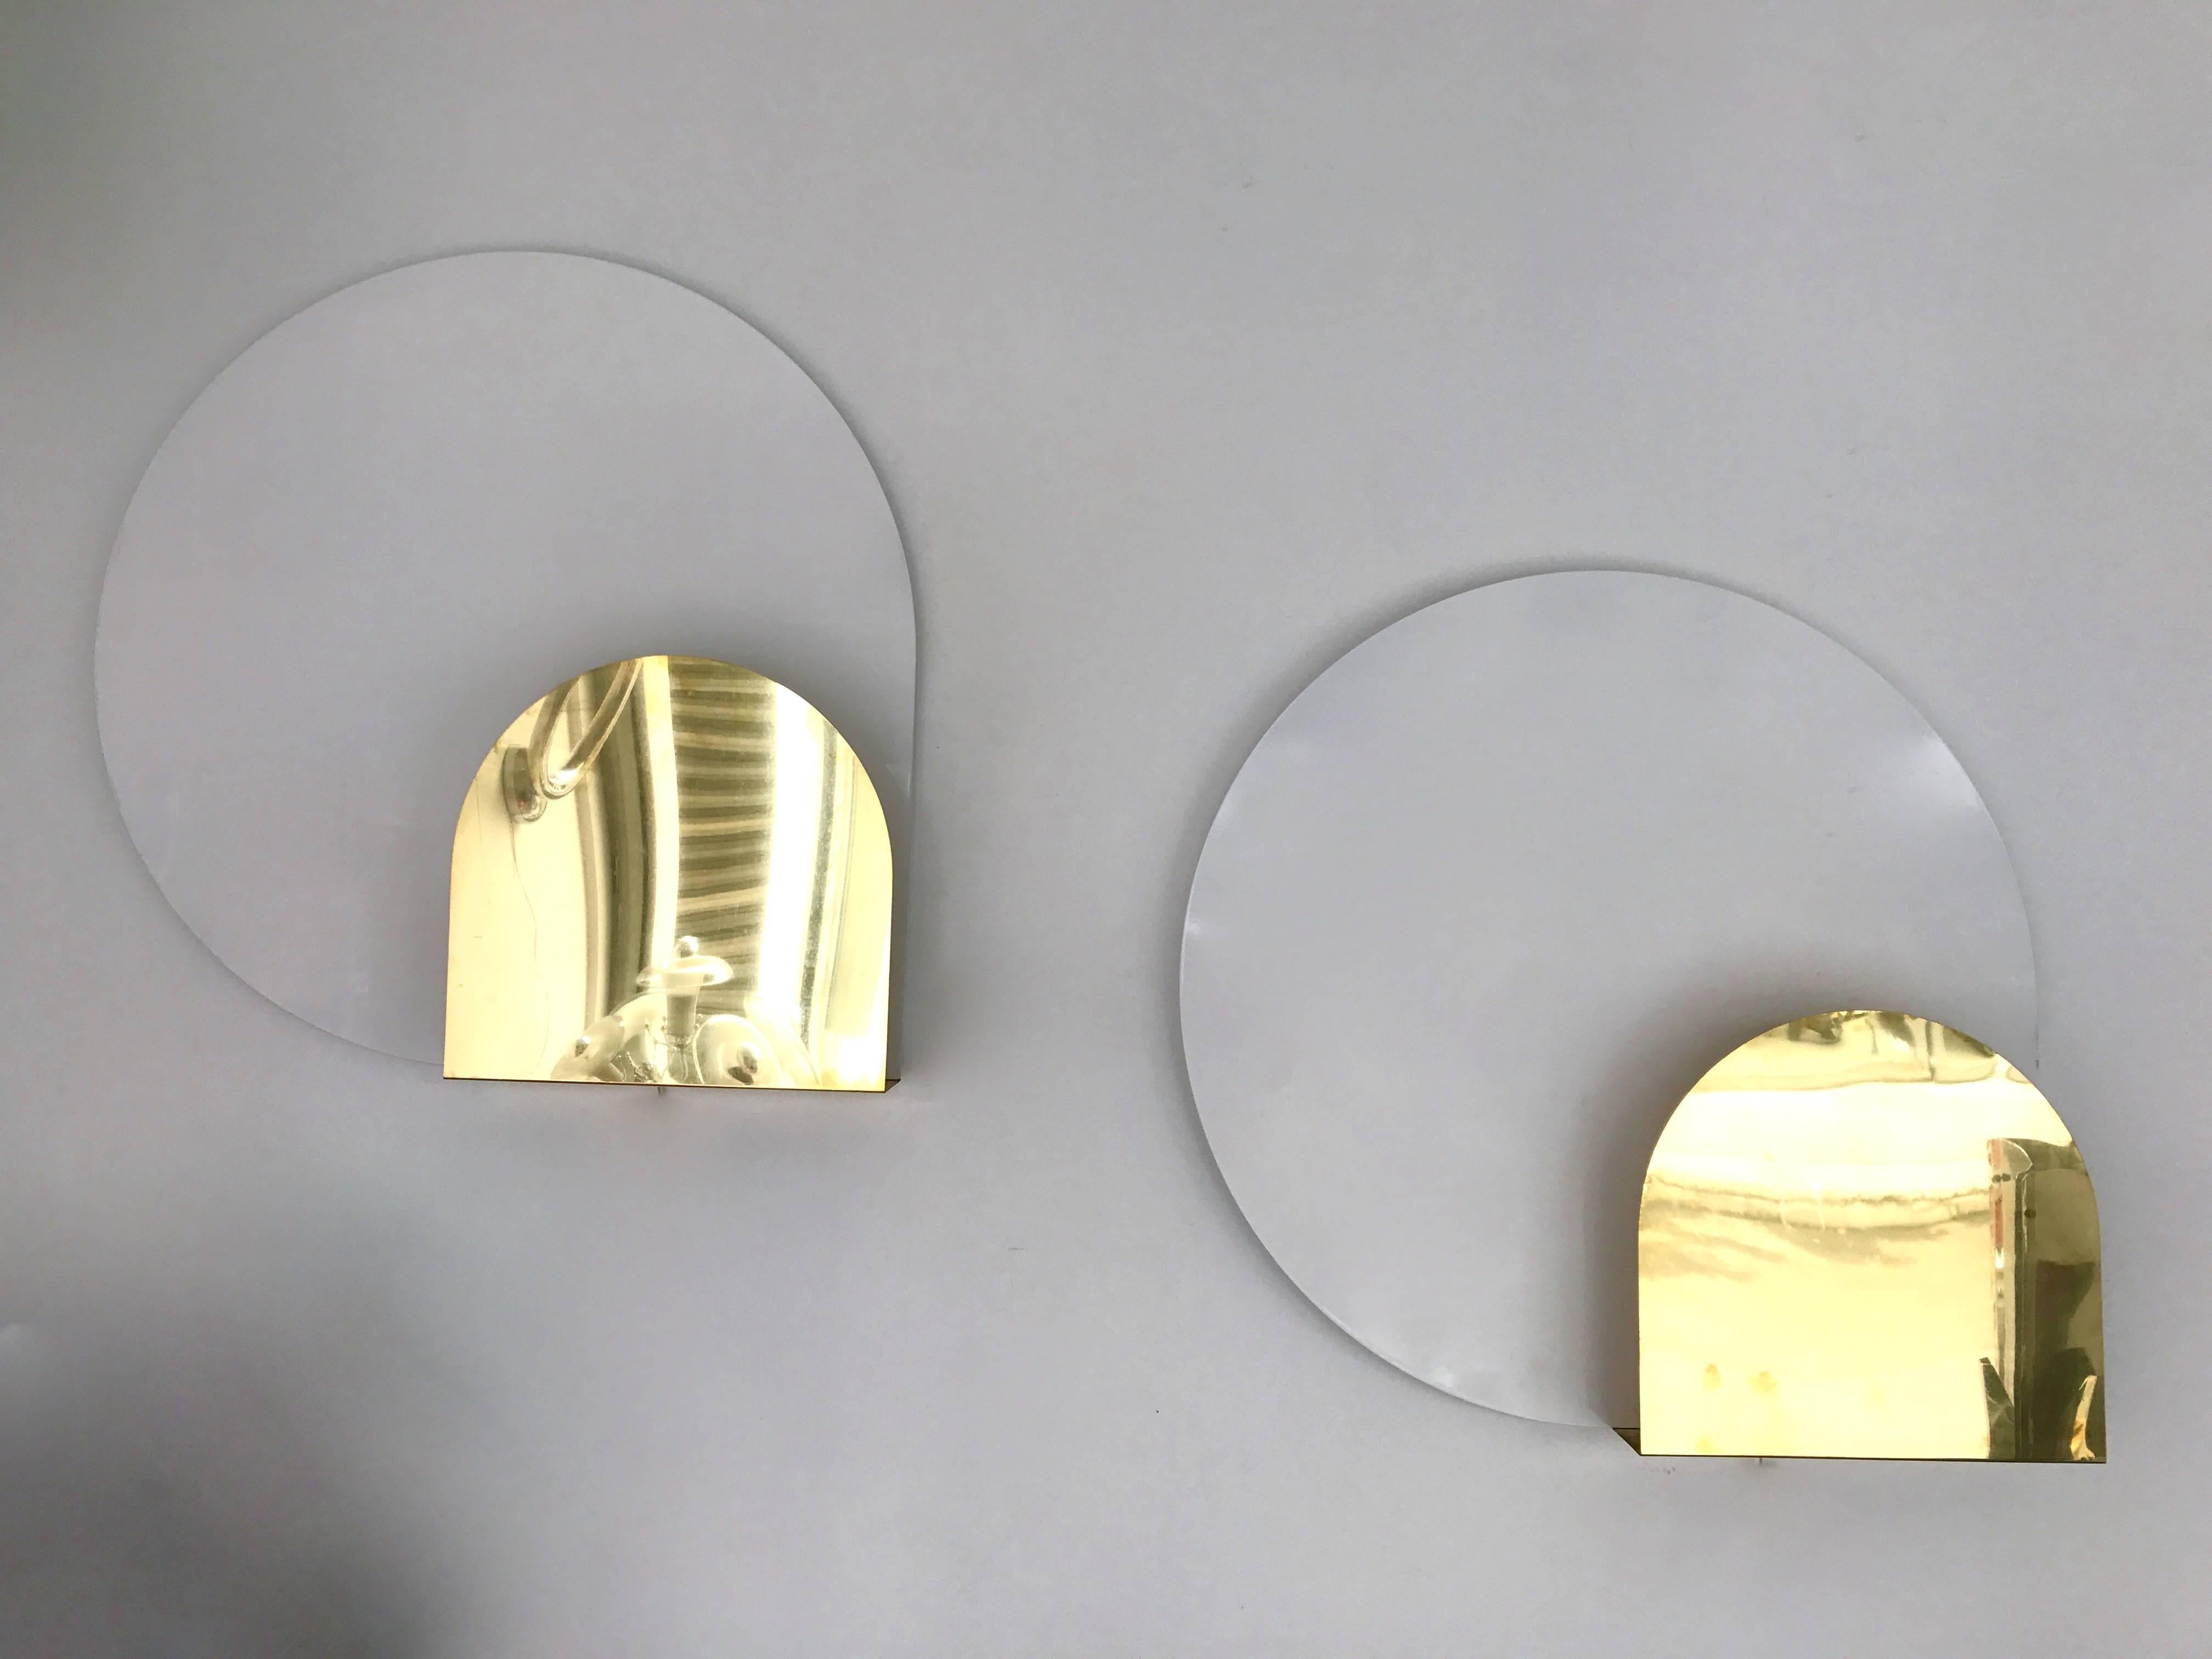 Italian Pair of Sconces by Pia Guidetti Crippa for Lumi, Italy, 1980s